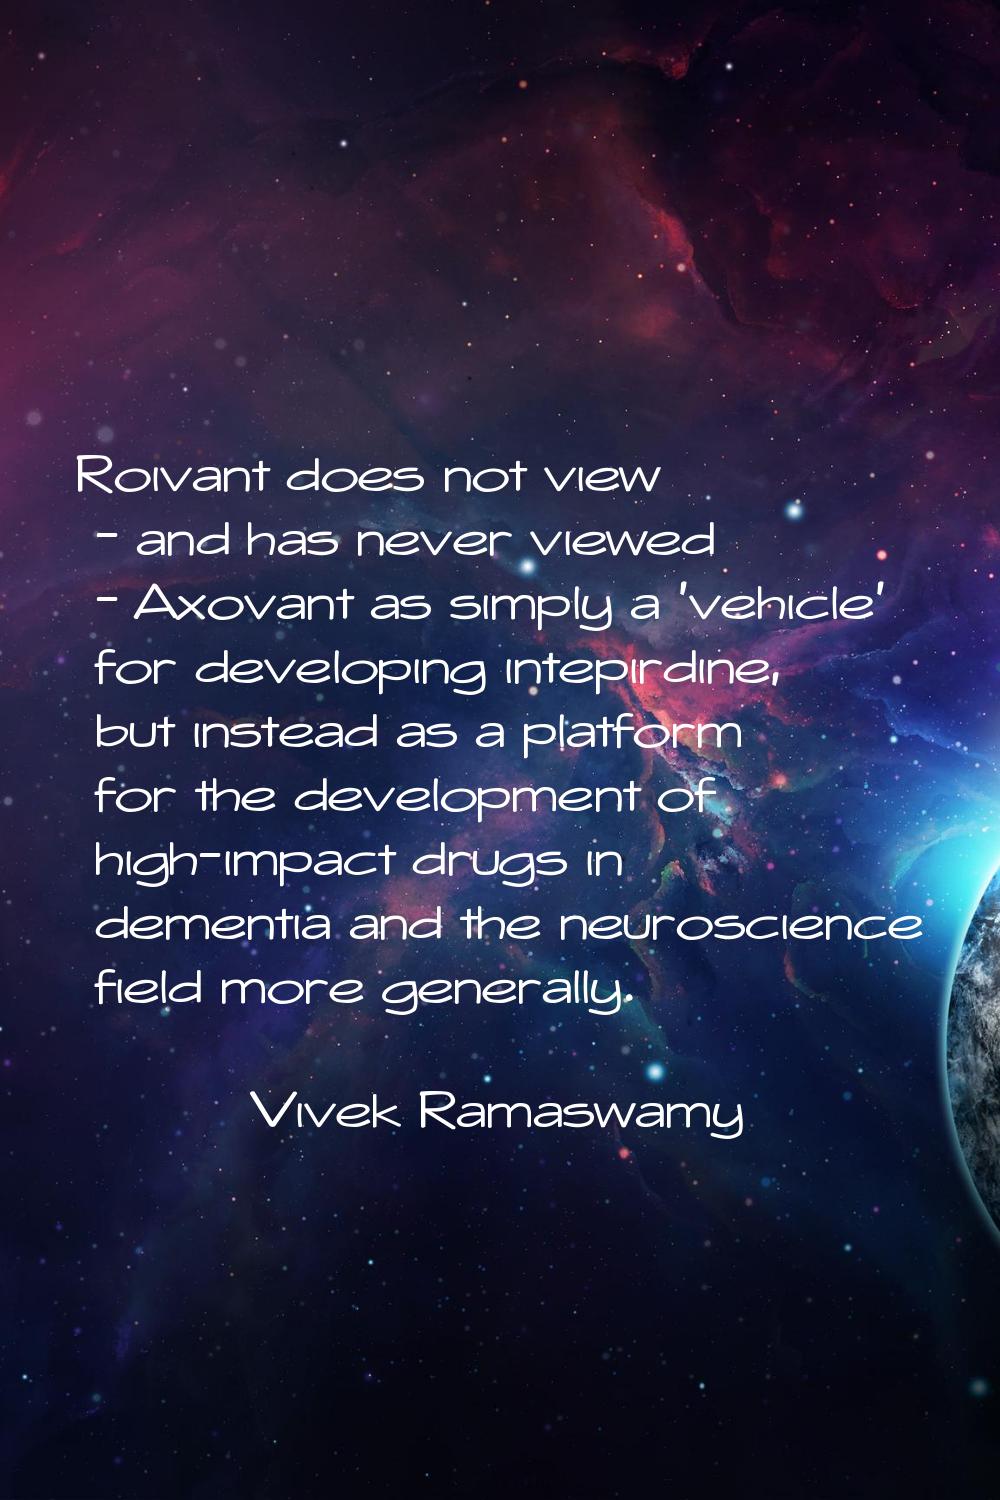 Roivant does not view - and has never viewed - Axovant as simply a 'vehicle' for developing intepir